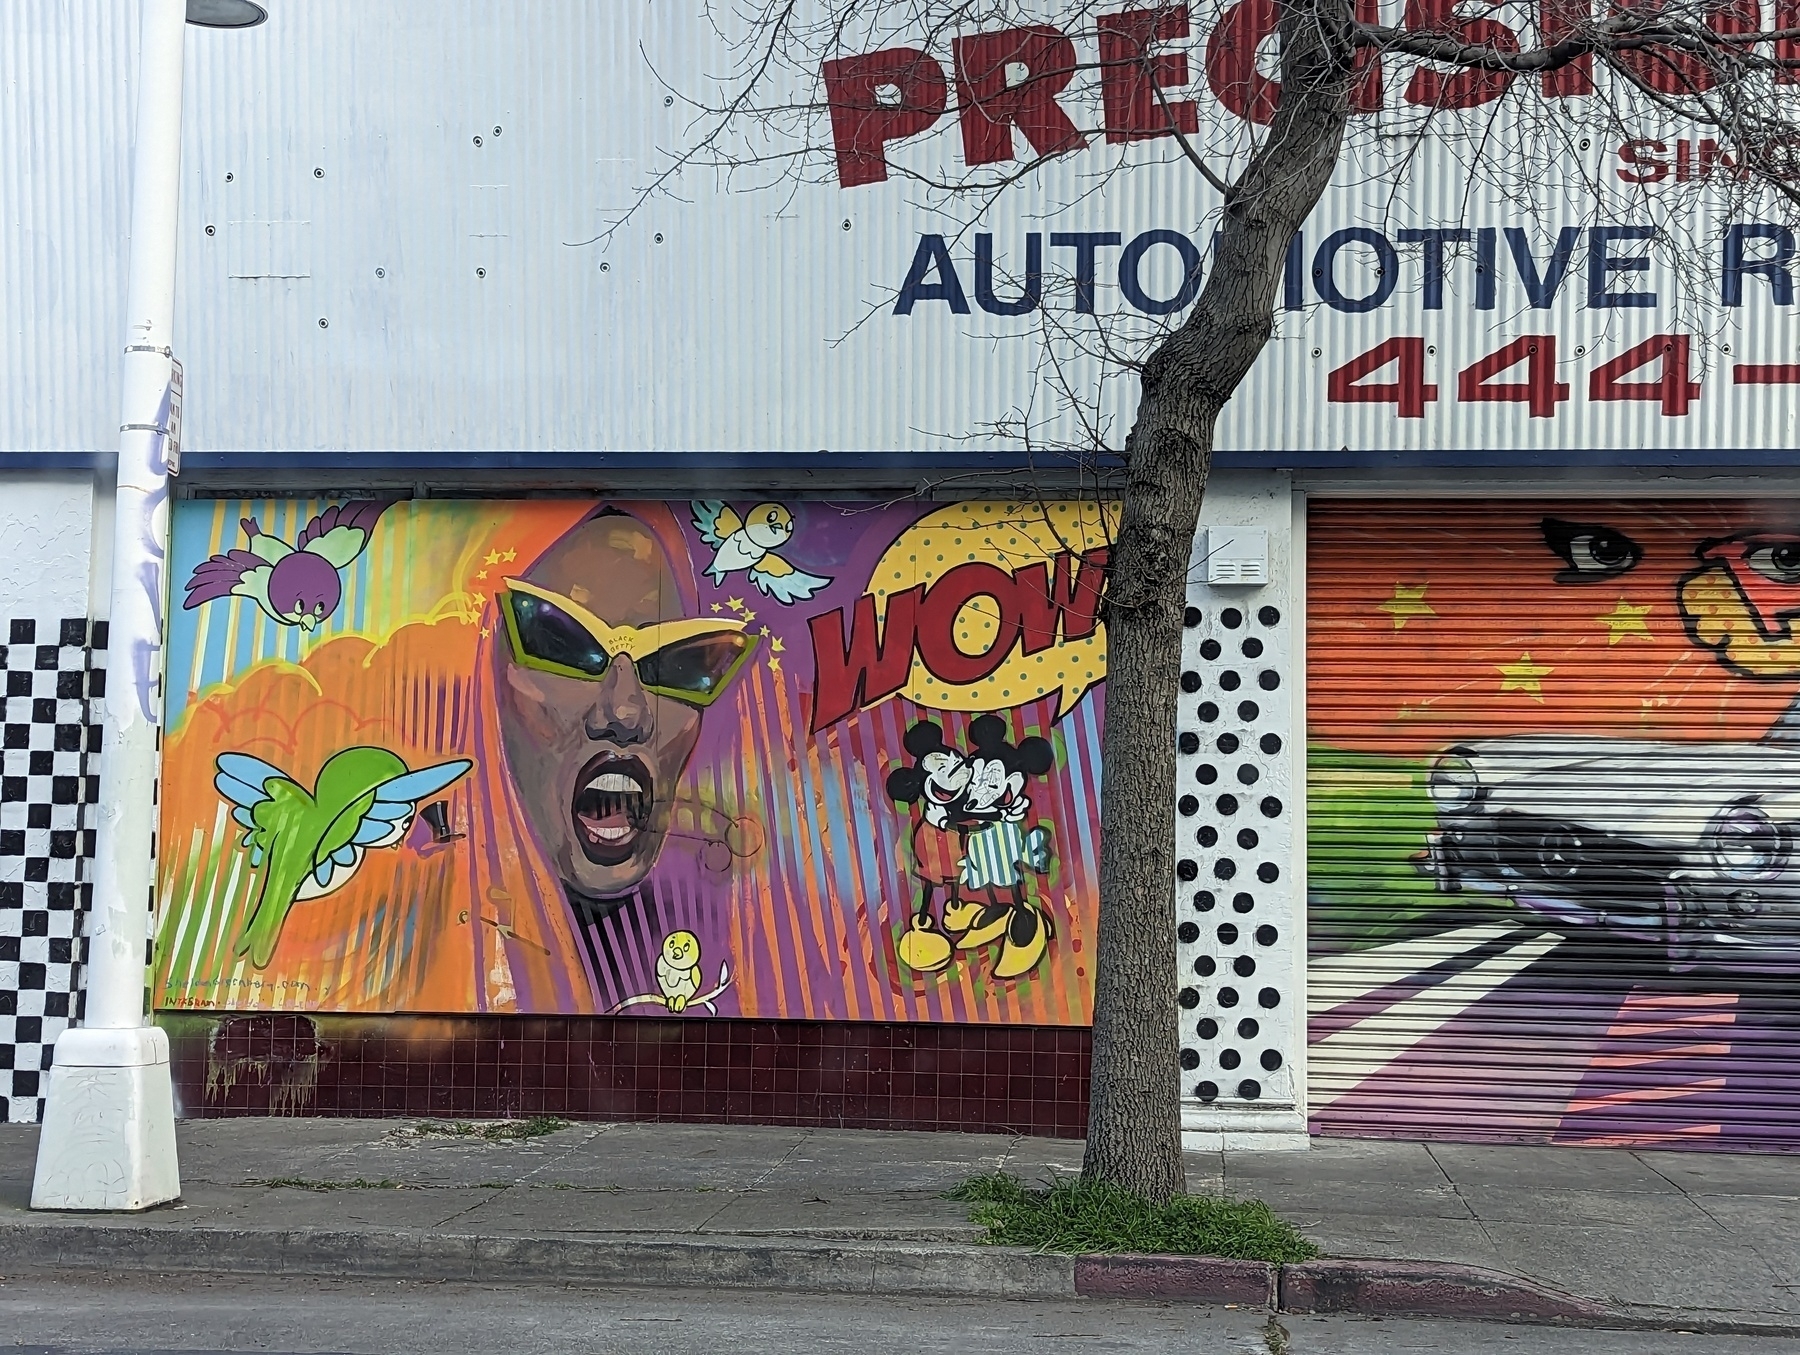 A mural outside an auto repair business Wednesday, March 23, 2023 along Broadway Auto Row in Oakland, California depicts a blue green hummingbird, an African American woman who looks a little bit like Grace Jones wearing sunglasses, a bowdlerized version of Mickey and Minnie Mouse and a tiny hand drawn owl.